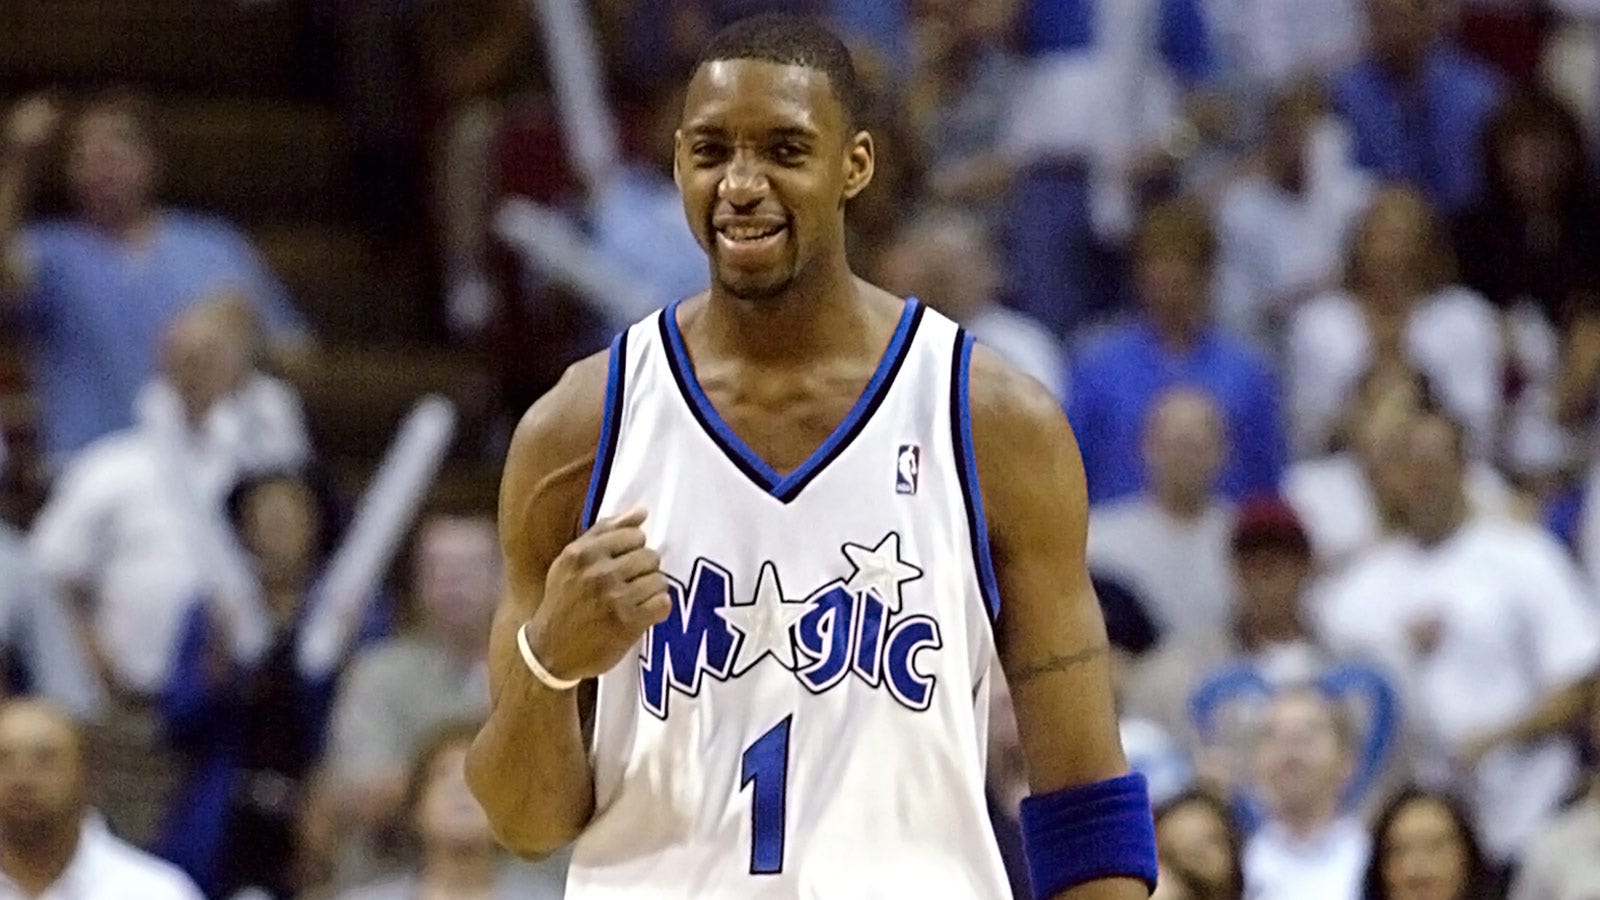 Tracy McGrady will be next inductee in 